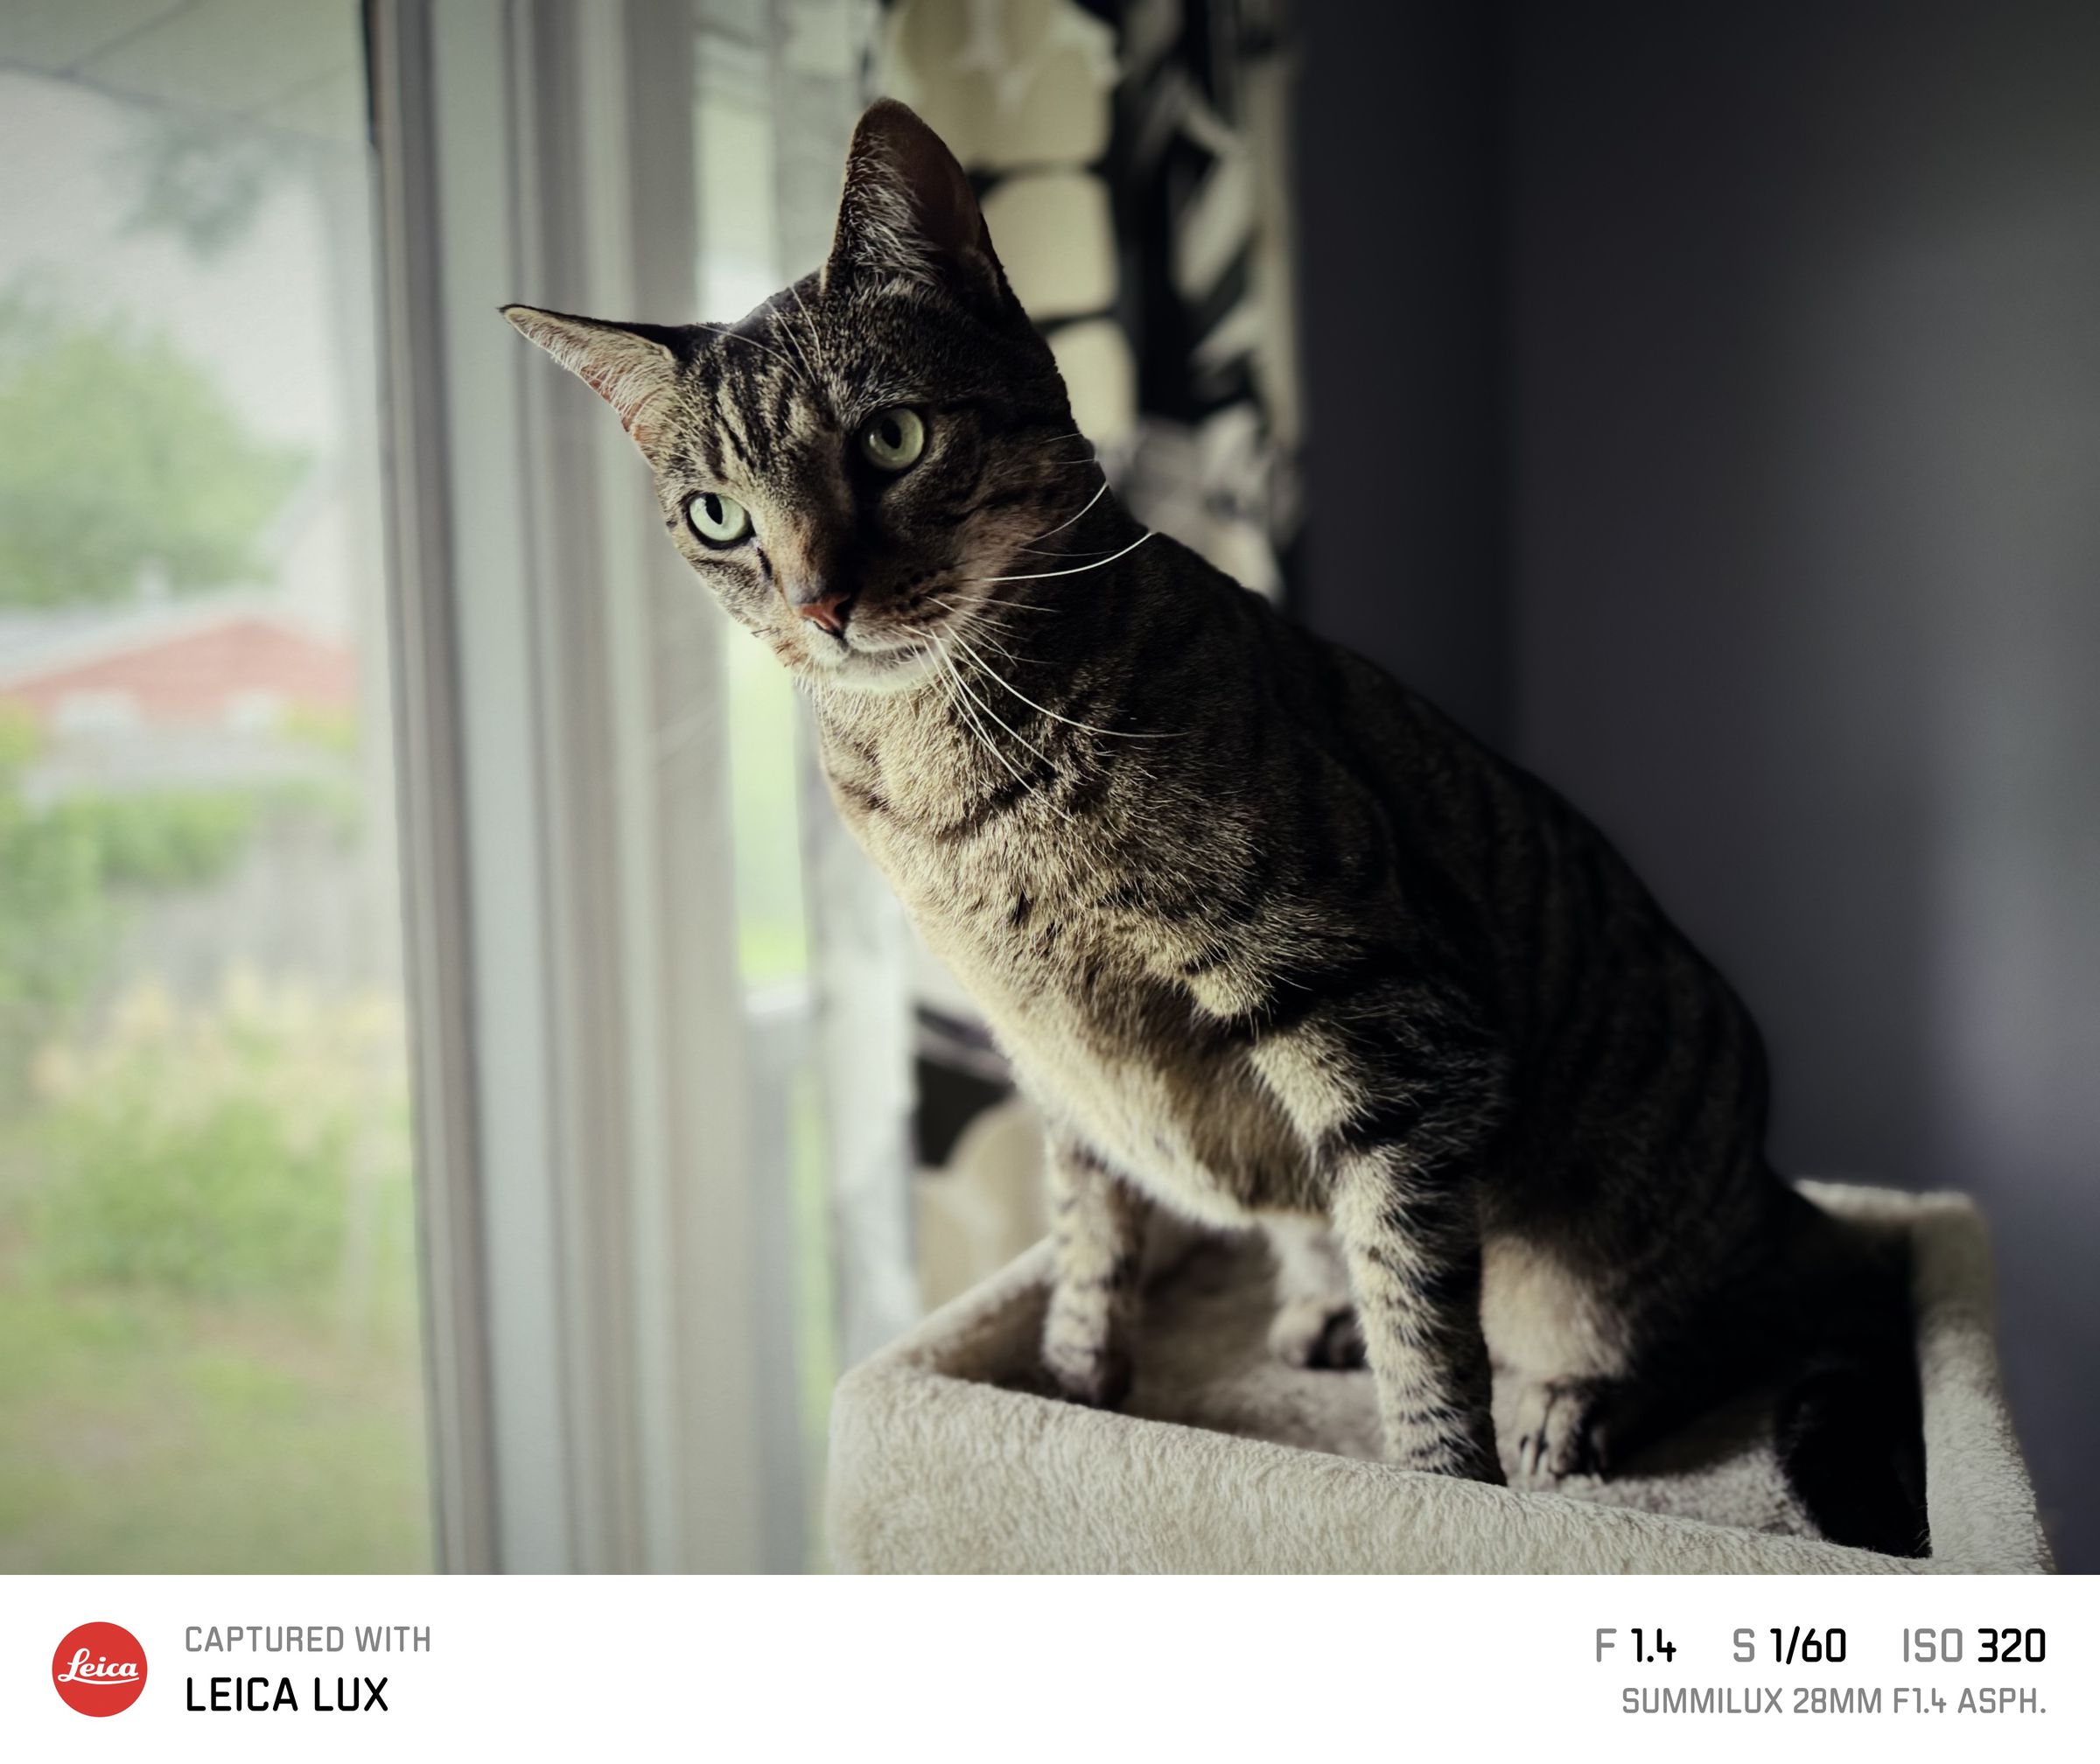 A cat near a window. The photo also has a branded Leica Lux frame showing its metadata.